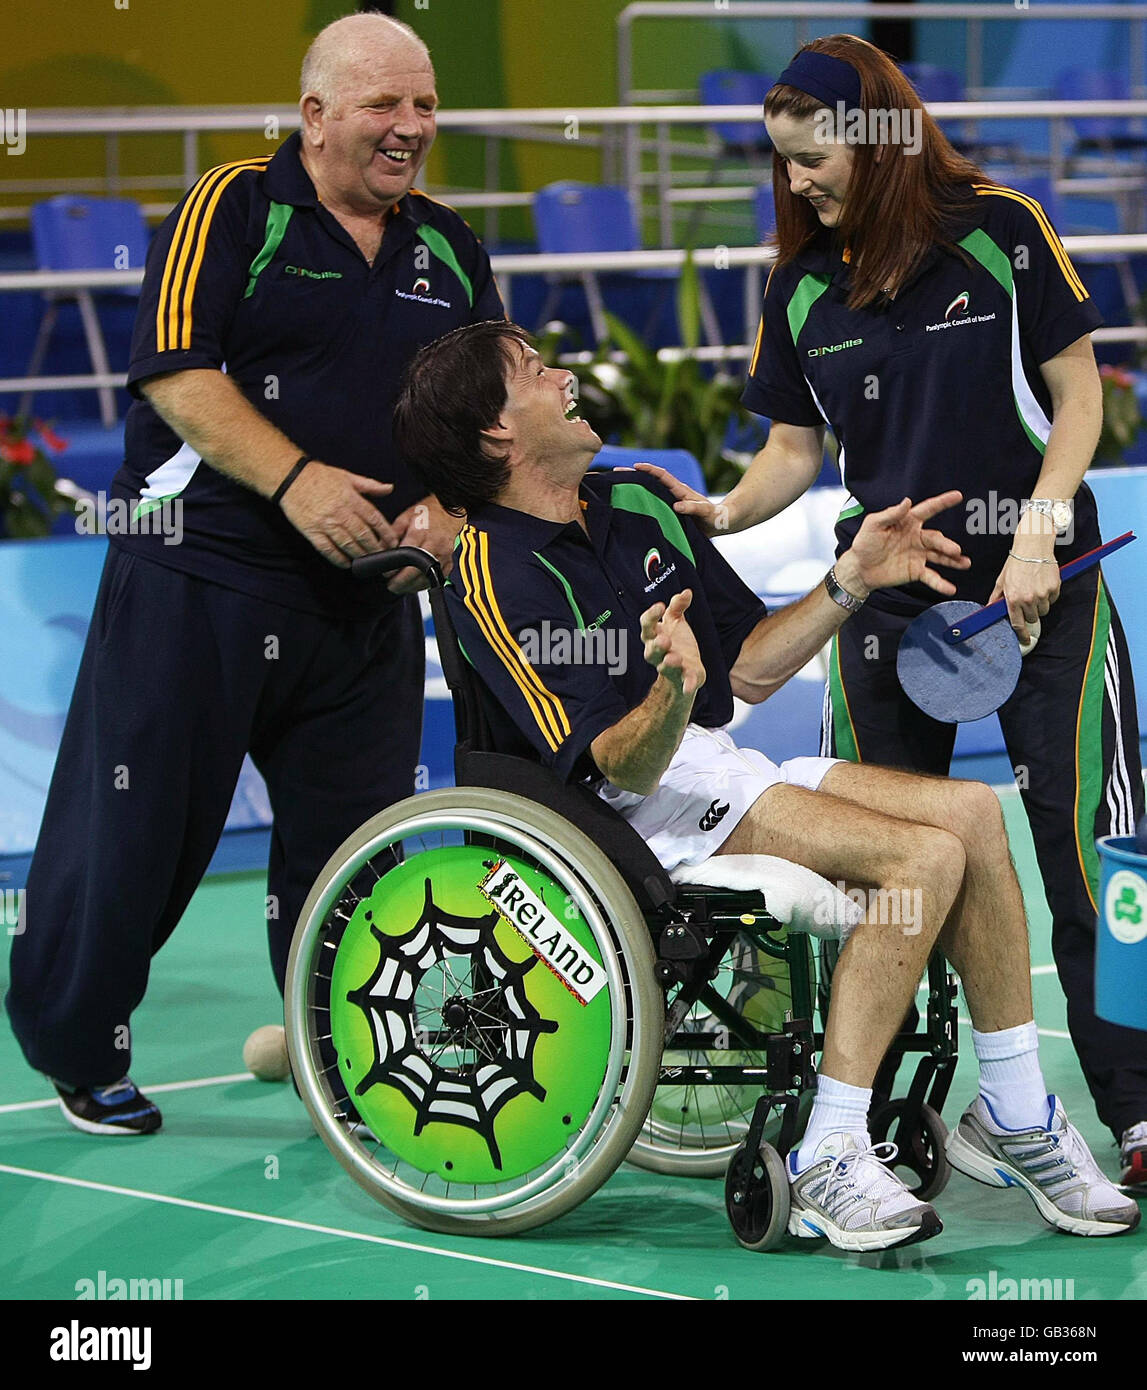 Gabriel Shelly competing in the Boccia event at the Fencing Hall of National Convention Center, celebrates a good shot with his coaches Patrick Judge and Brenda Hopkins in Beijing, China. Stock Photo